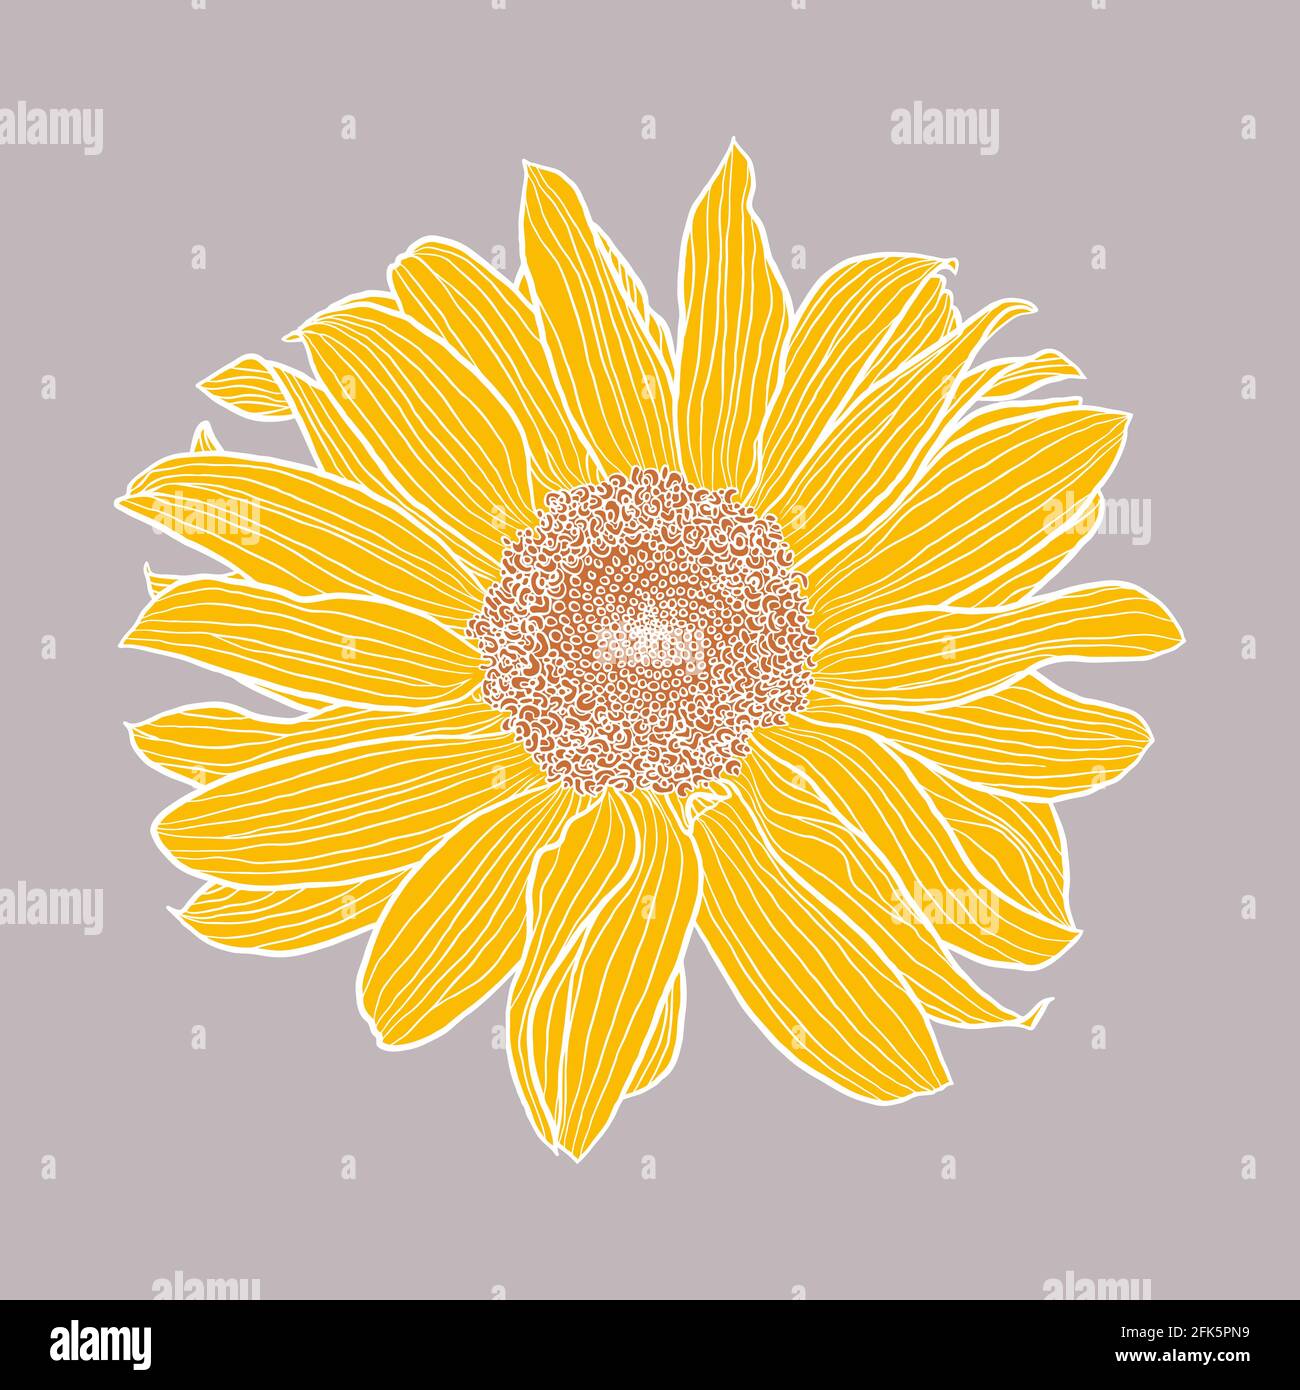 Single sunflower head digital drawing, yellow and terracotta with white outline on gray. Floral vector illustration in modern style. Decorative design element for wallpaper, wrapping, textile, fabric. Stock Vector